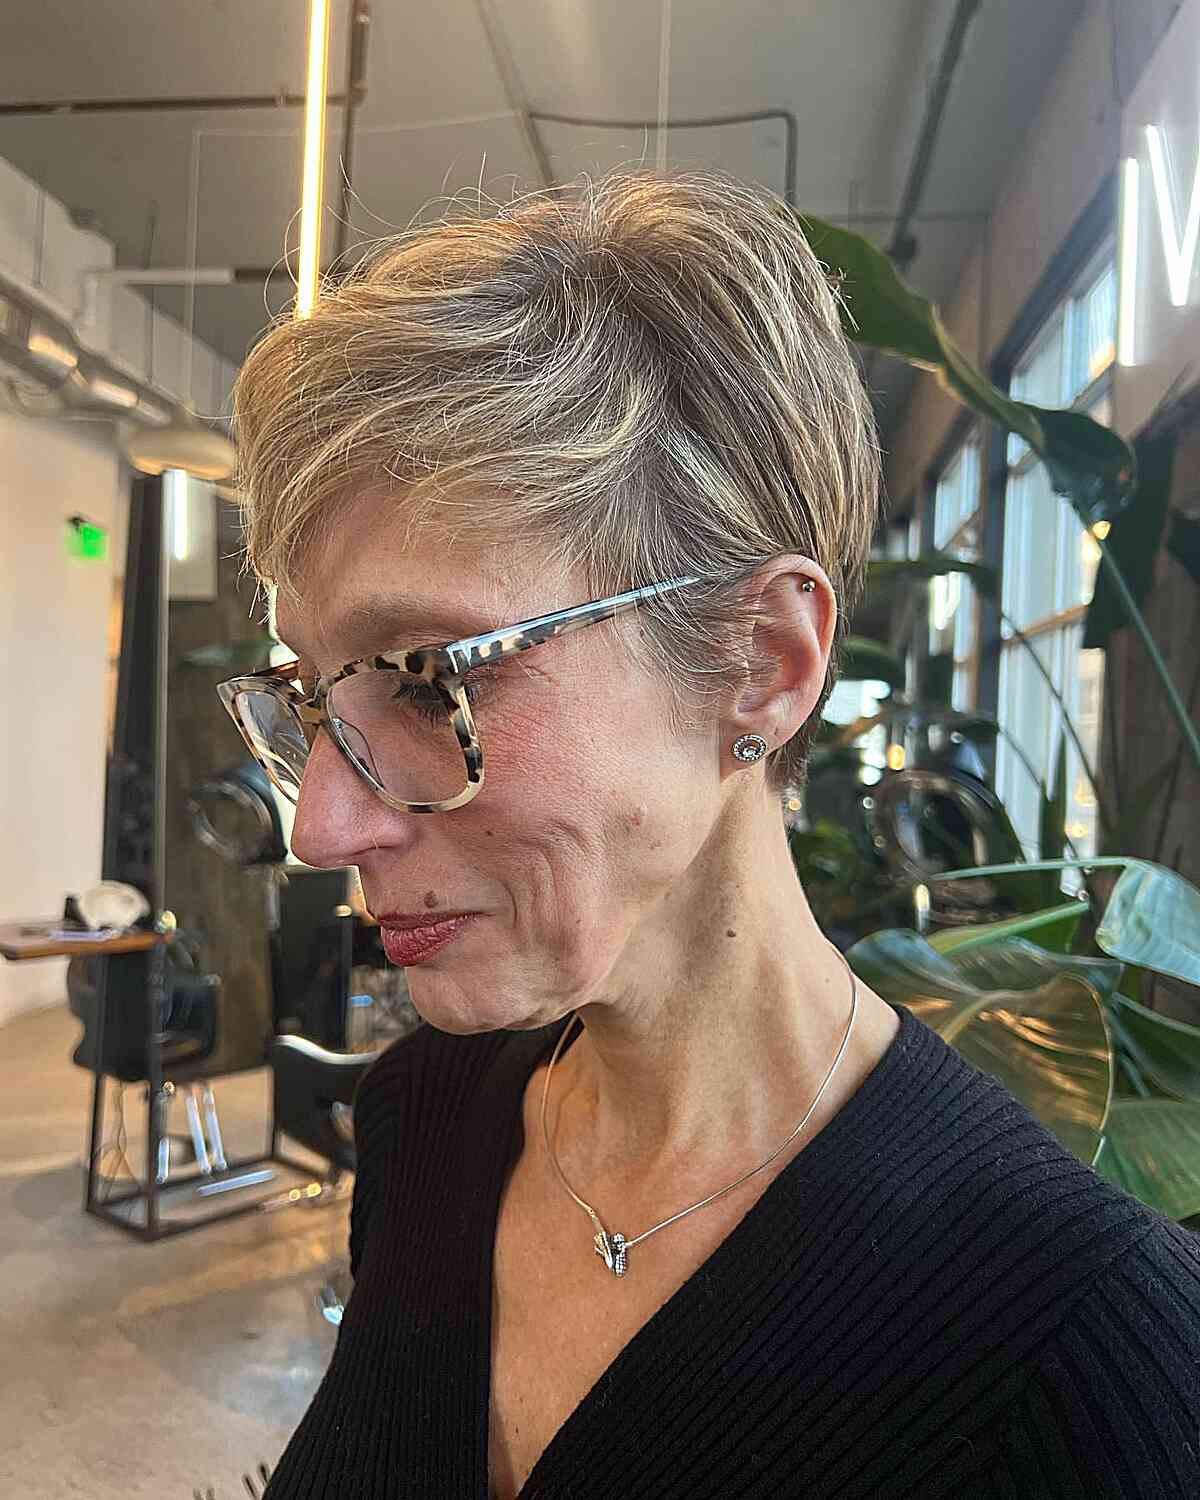 Short Side-Swept Pixie with Blonde Highlights for women past their 60s with glasses